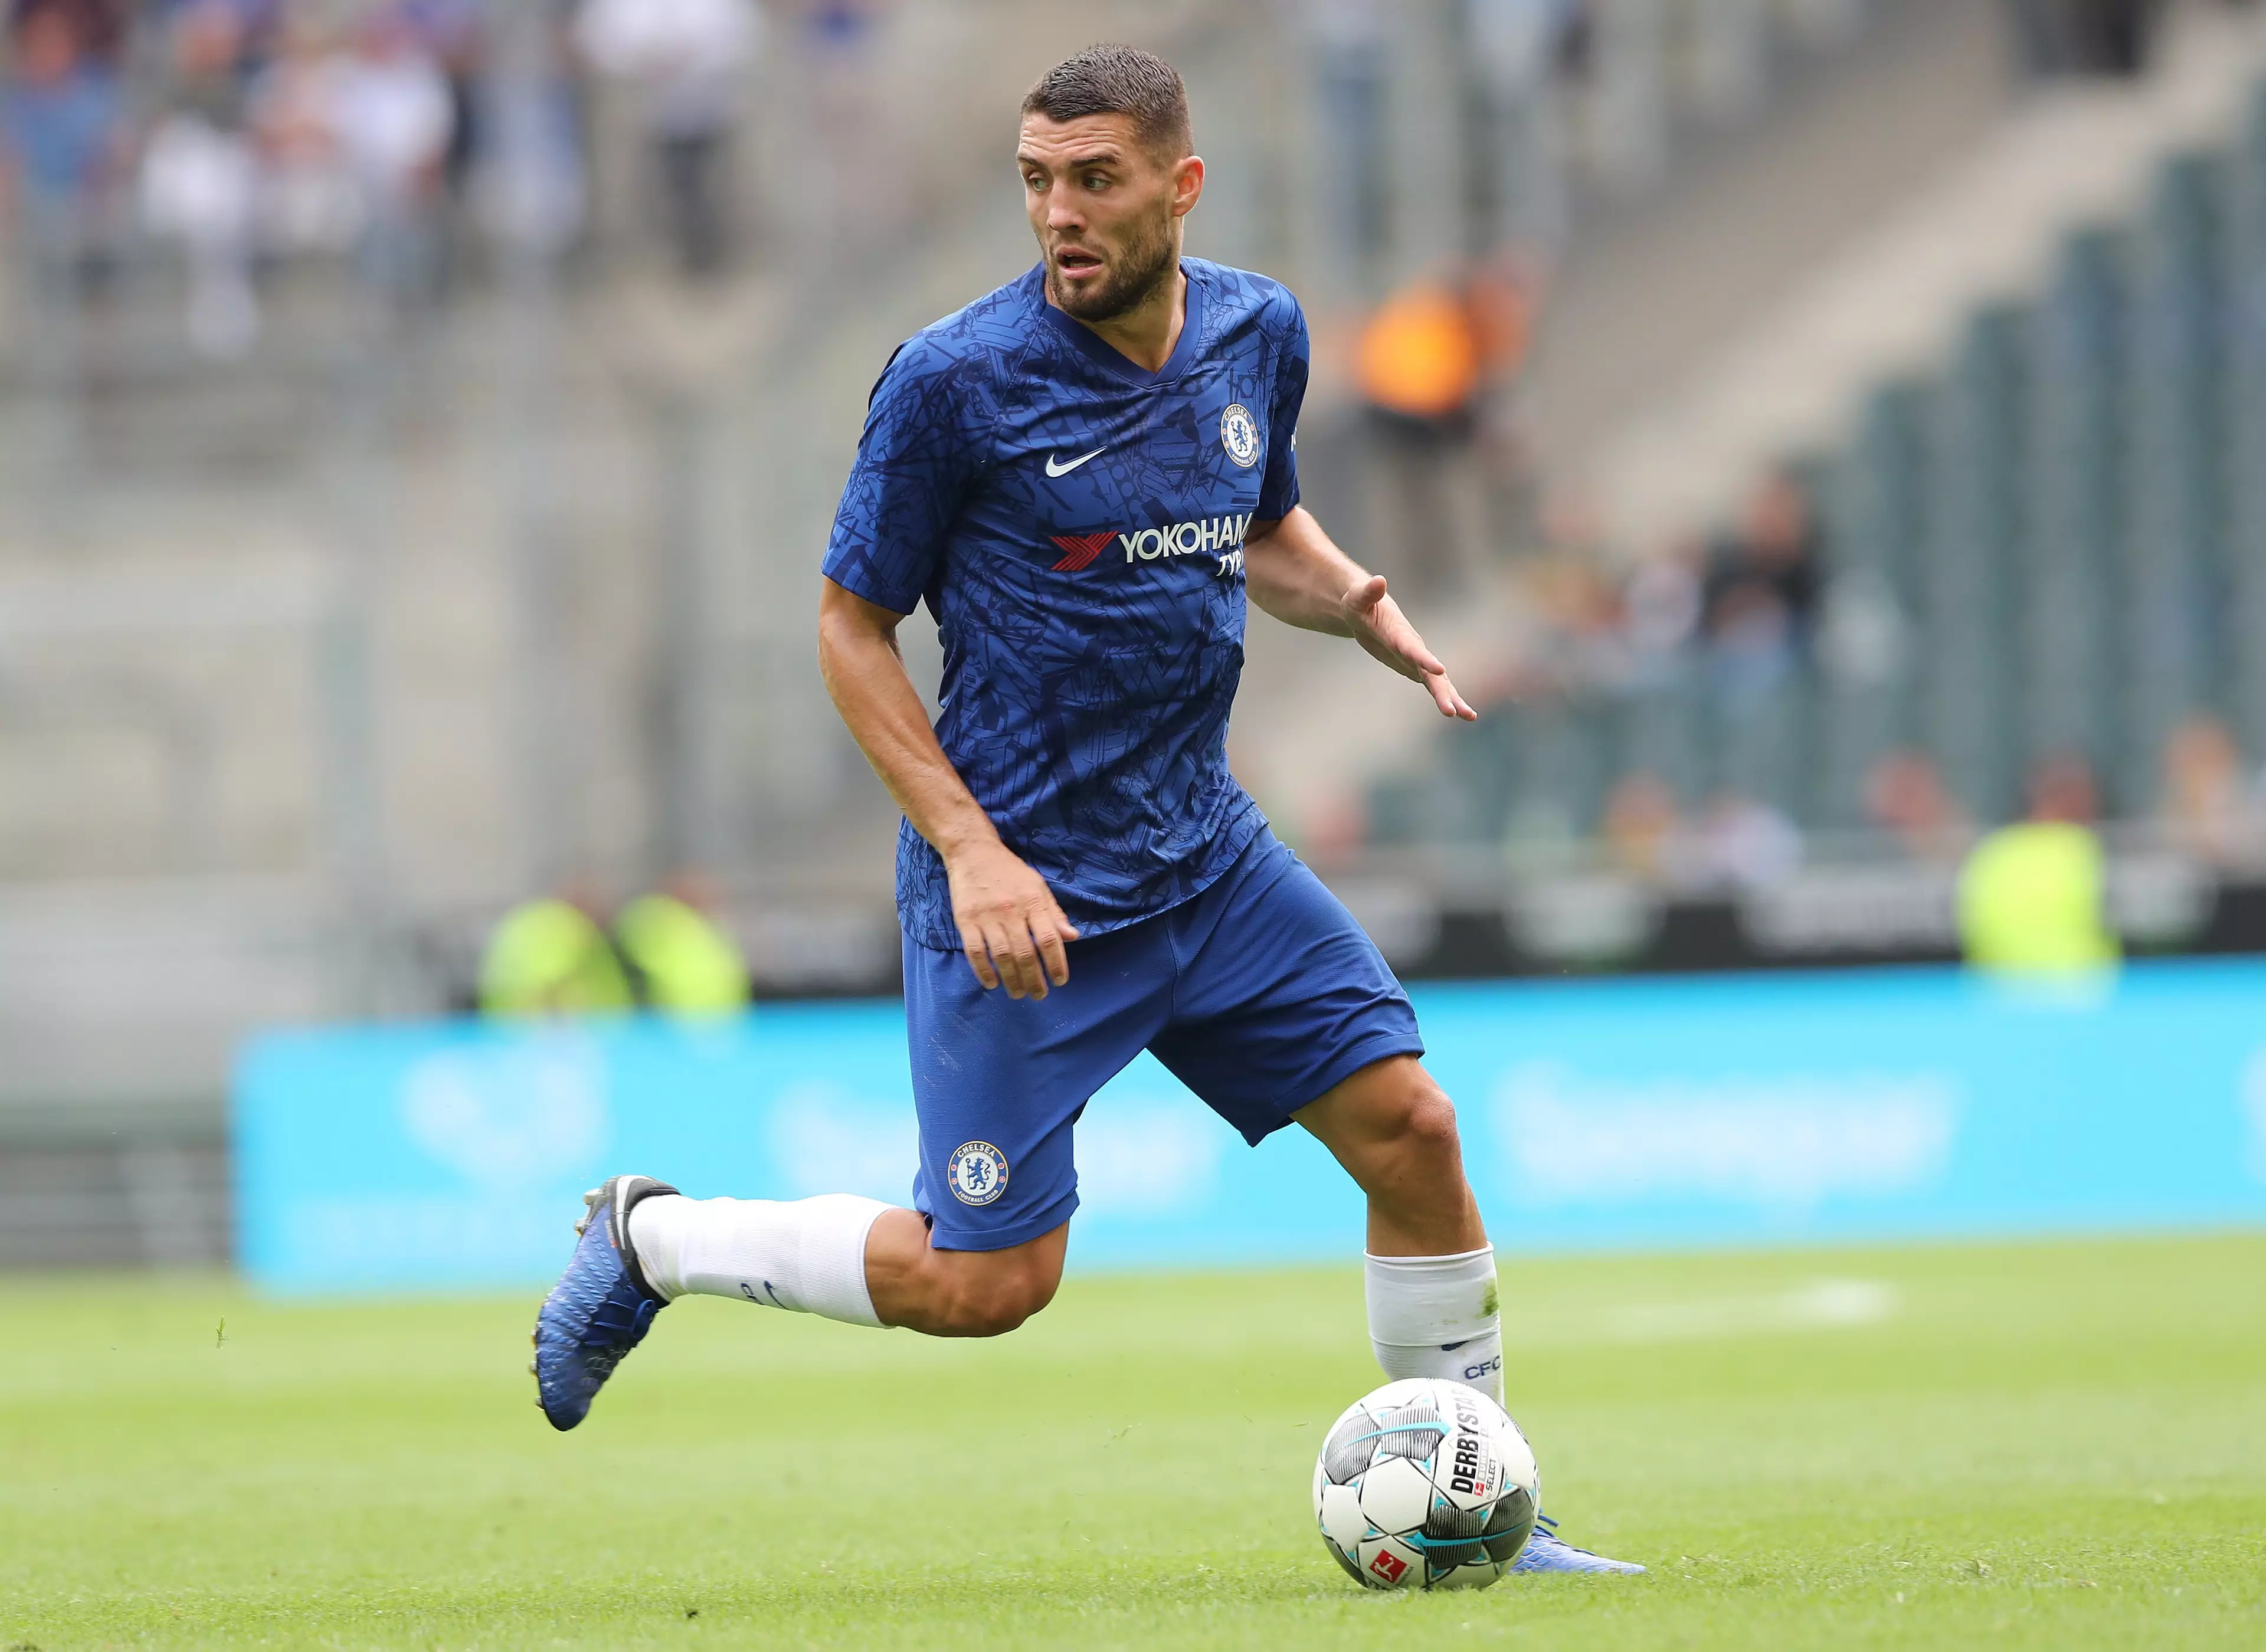 Kovacic was the only player to move to transfer banned Chelsea after his loan spell last season included an option to buy. Image: PA Images